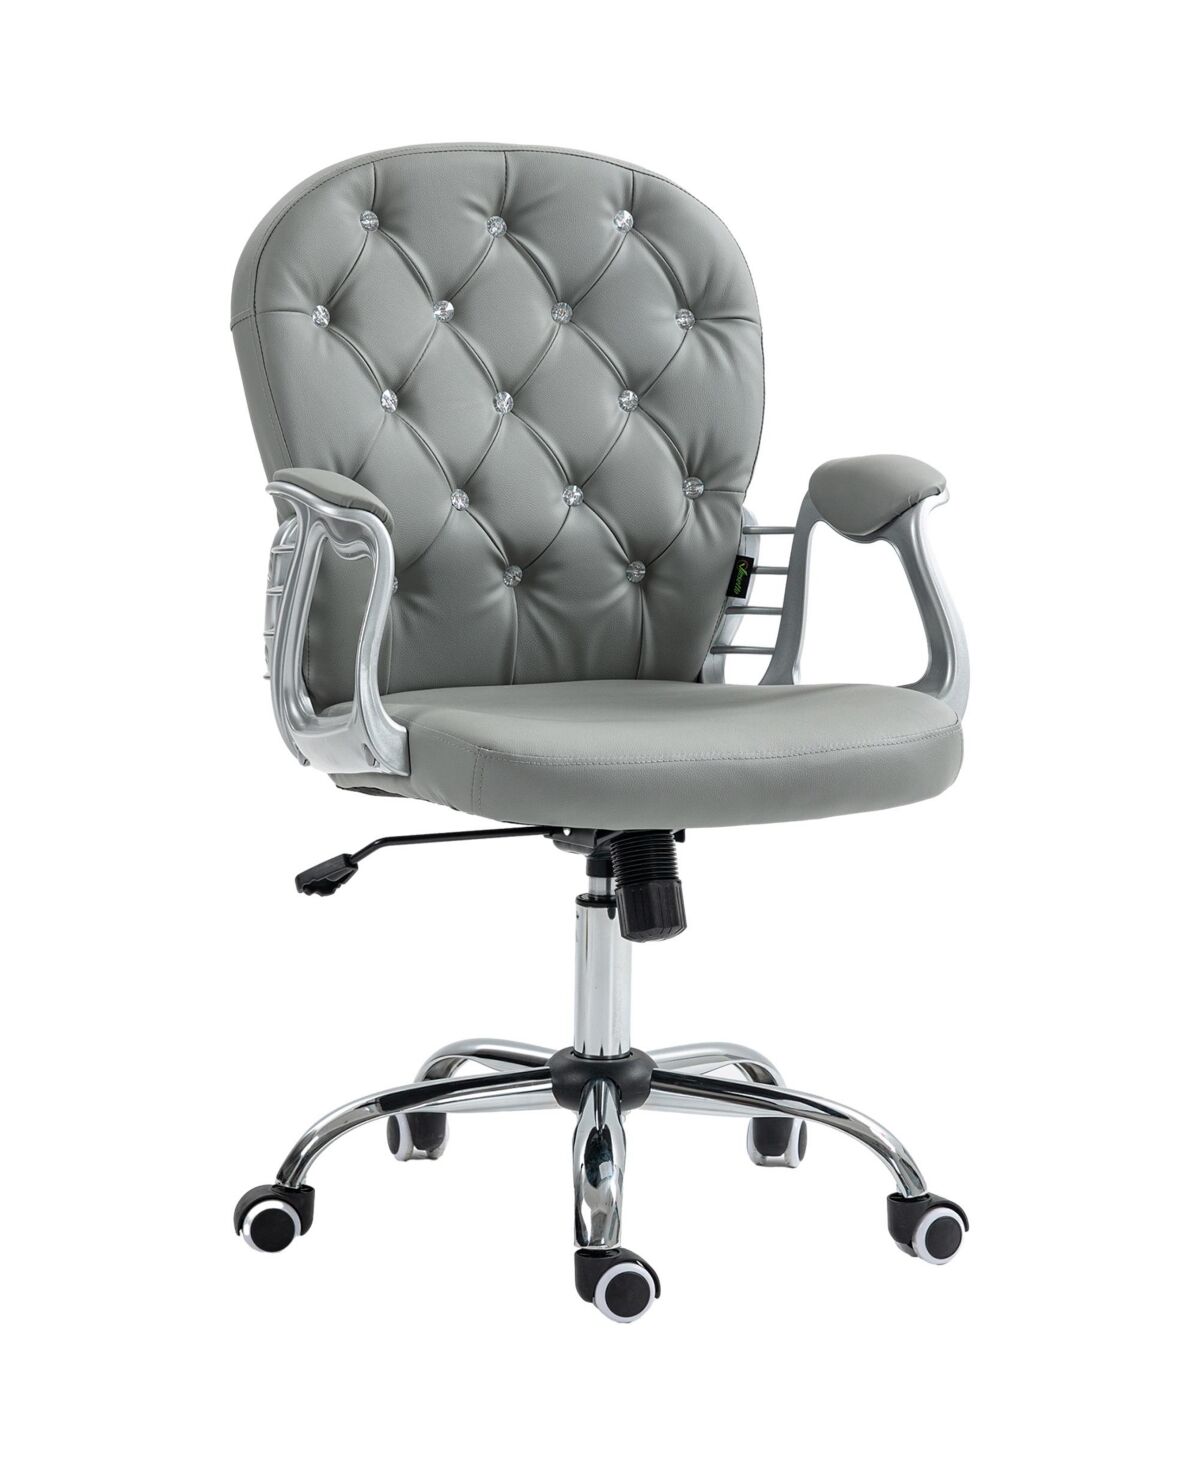 Vinsetto Button Tufted Home Office Chair with Adjustable Height Armrests - Grey